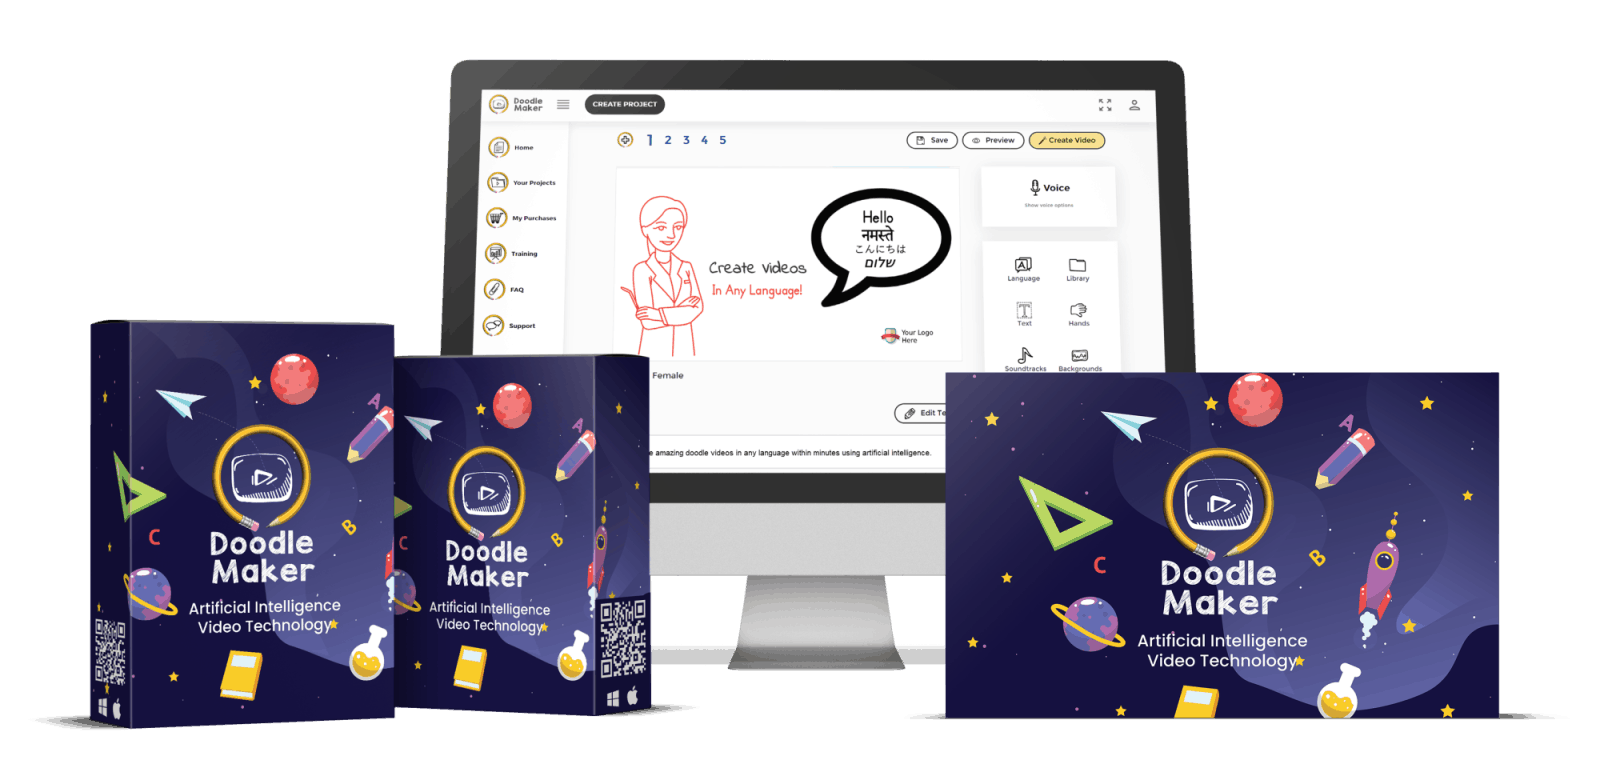 DoodleMaker Review – World’s 1st Doodle Video Creation Software To Create Whiteboard, Blackboard, And Glassboard Doodle Videos In Minutes Within ONE APP